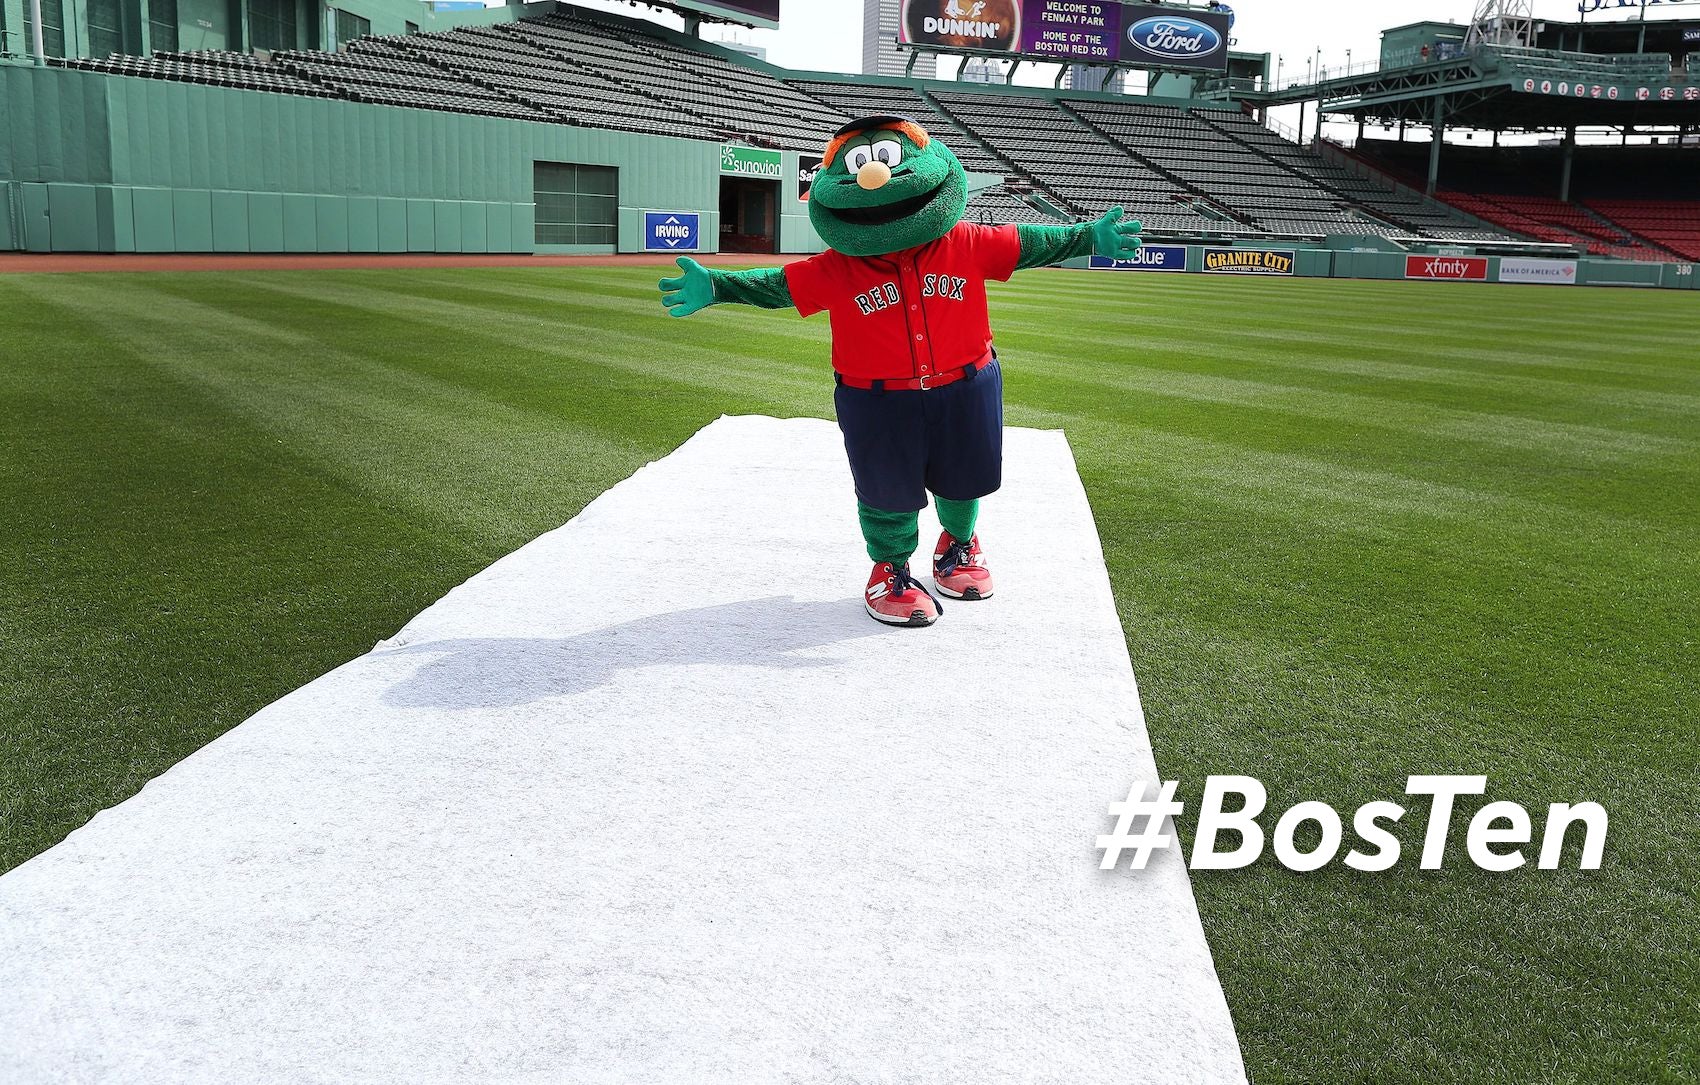 Game Day Rules with Wally the Green Monster